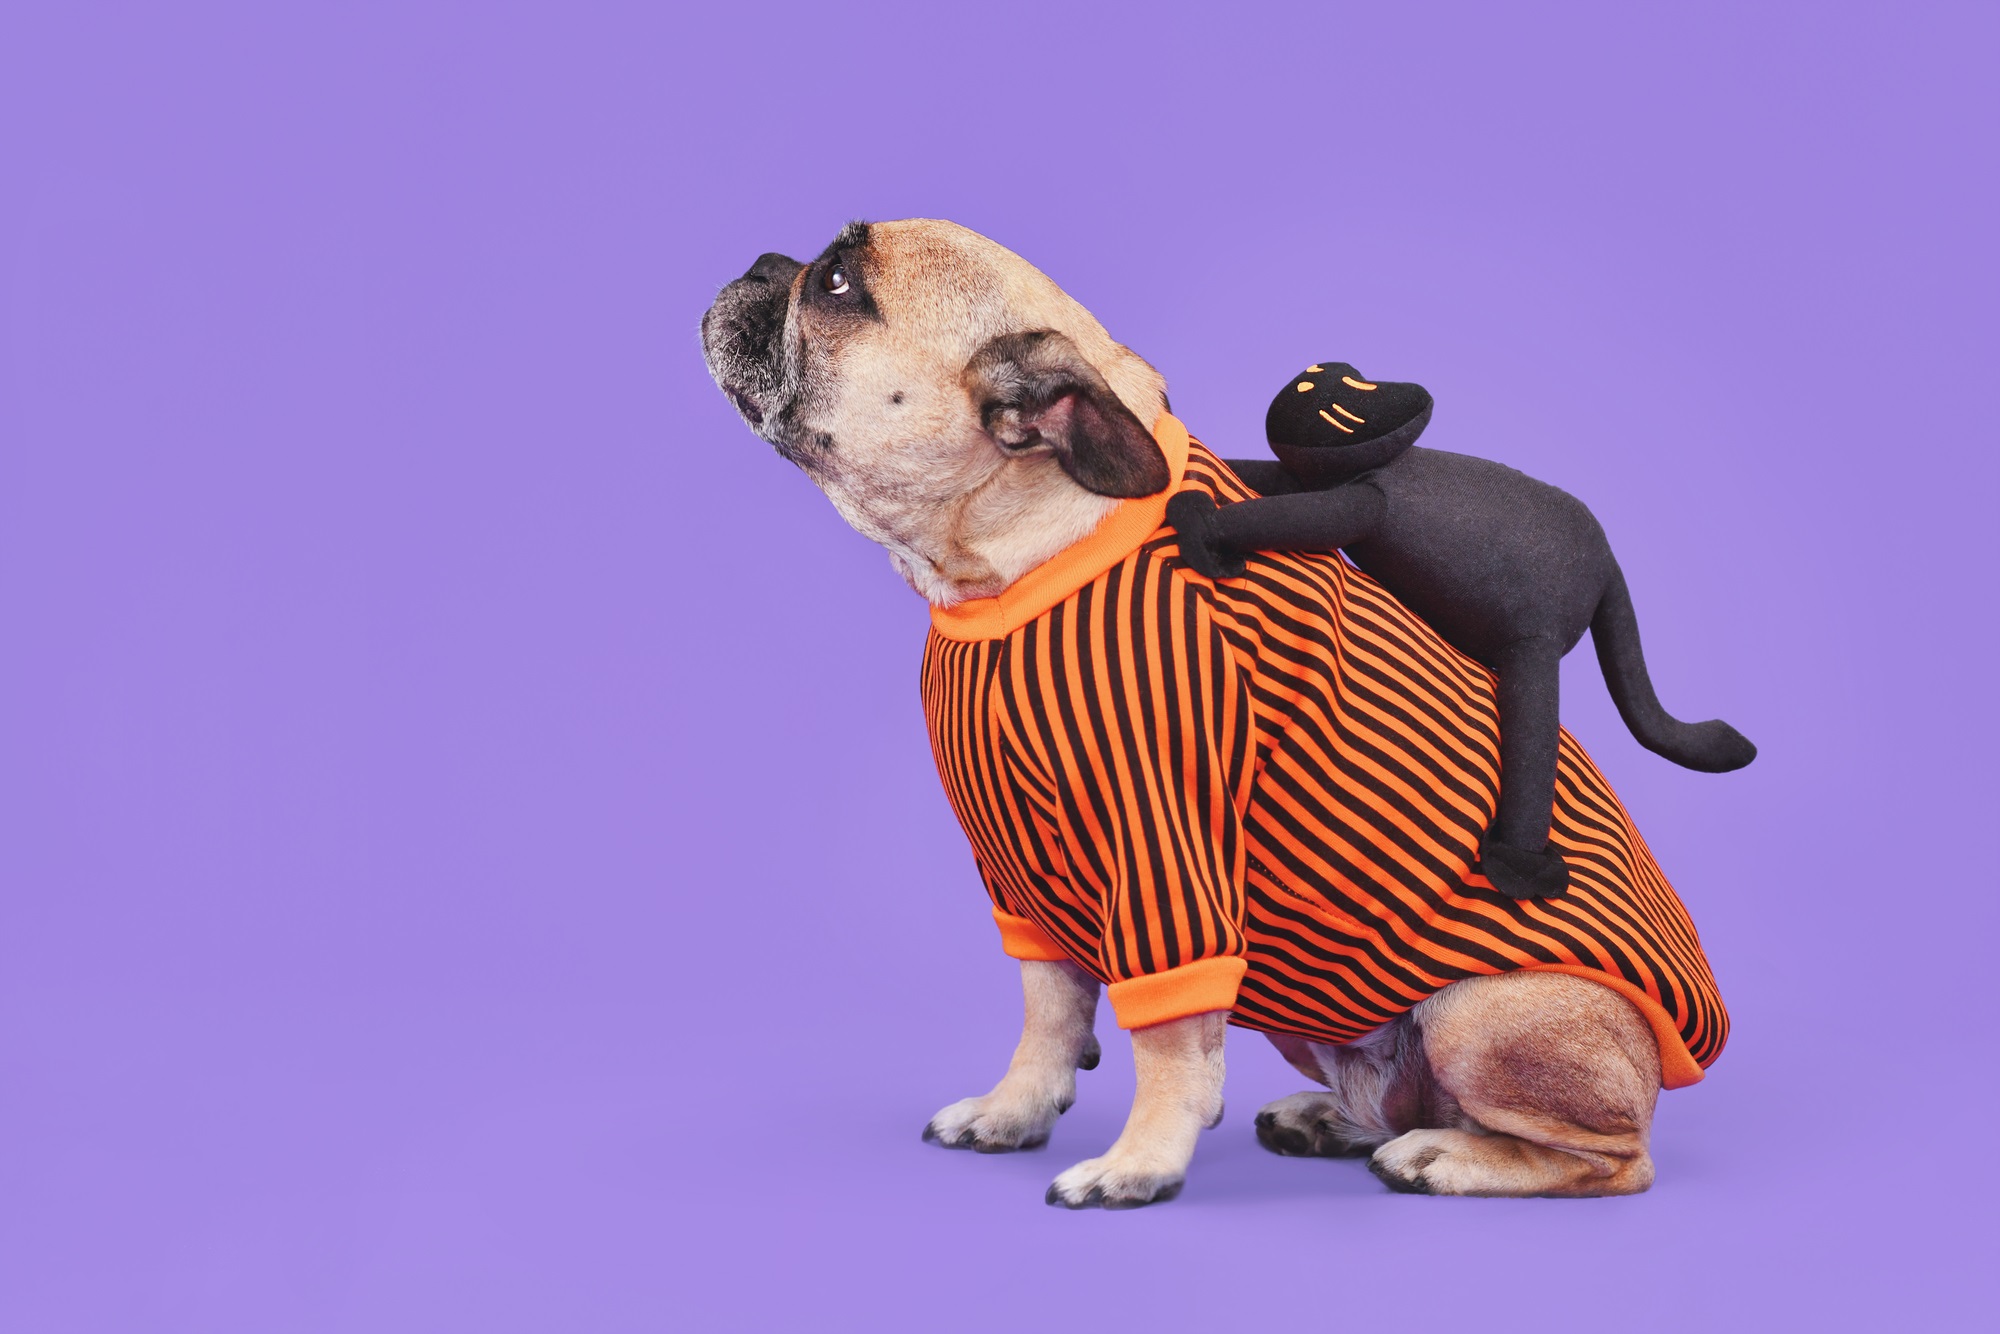 Should pets wear Halloween costumes? Your furry friend can help you decide.